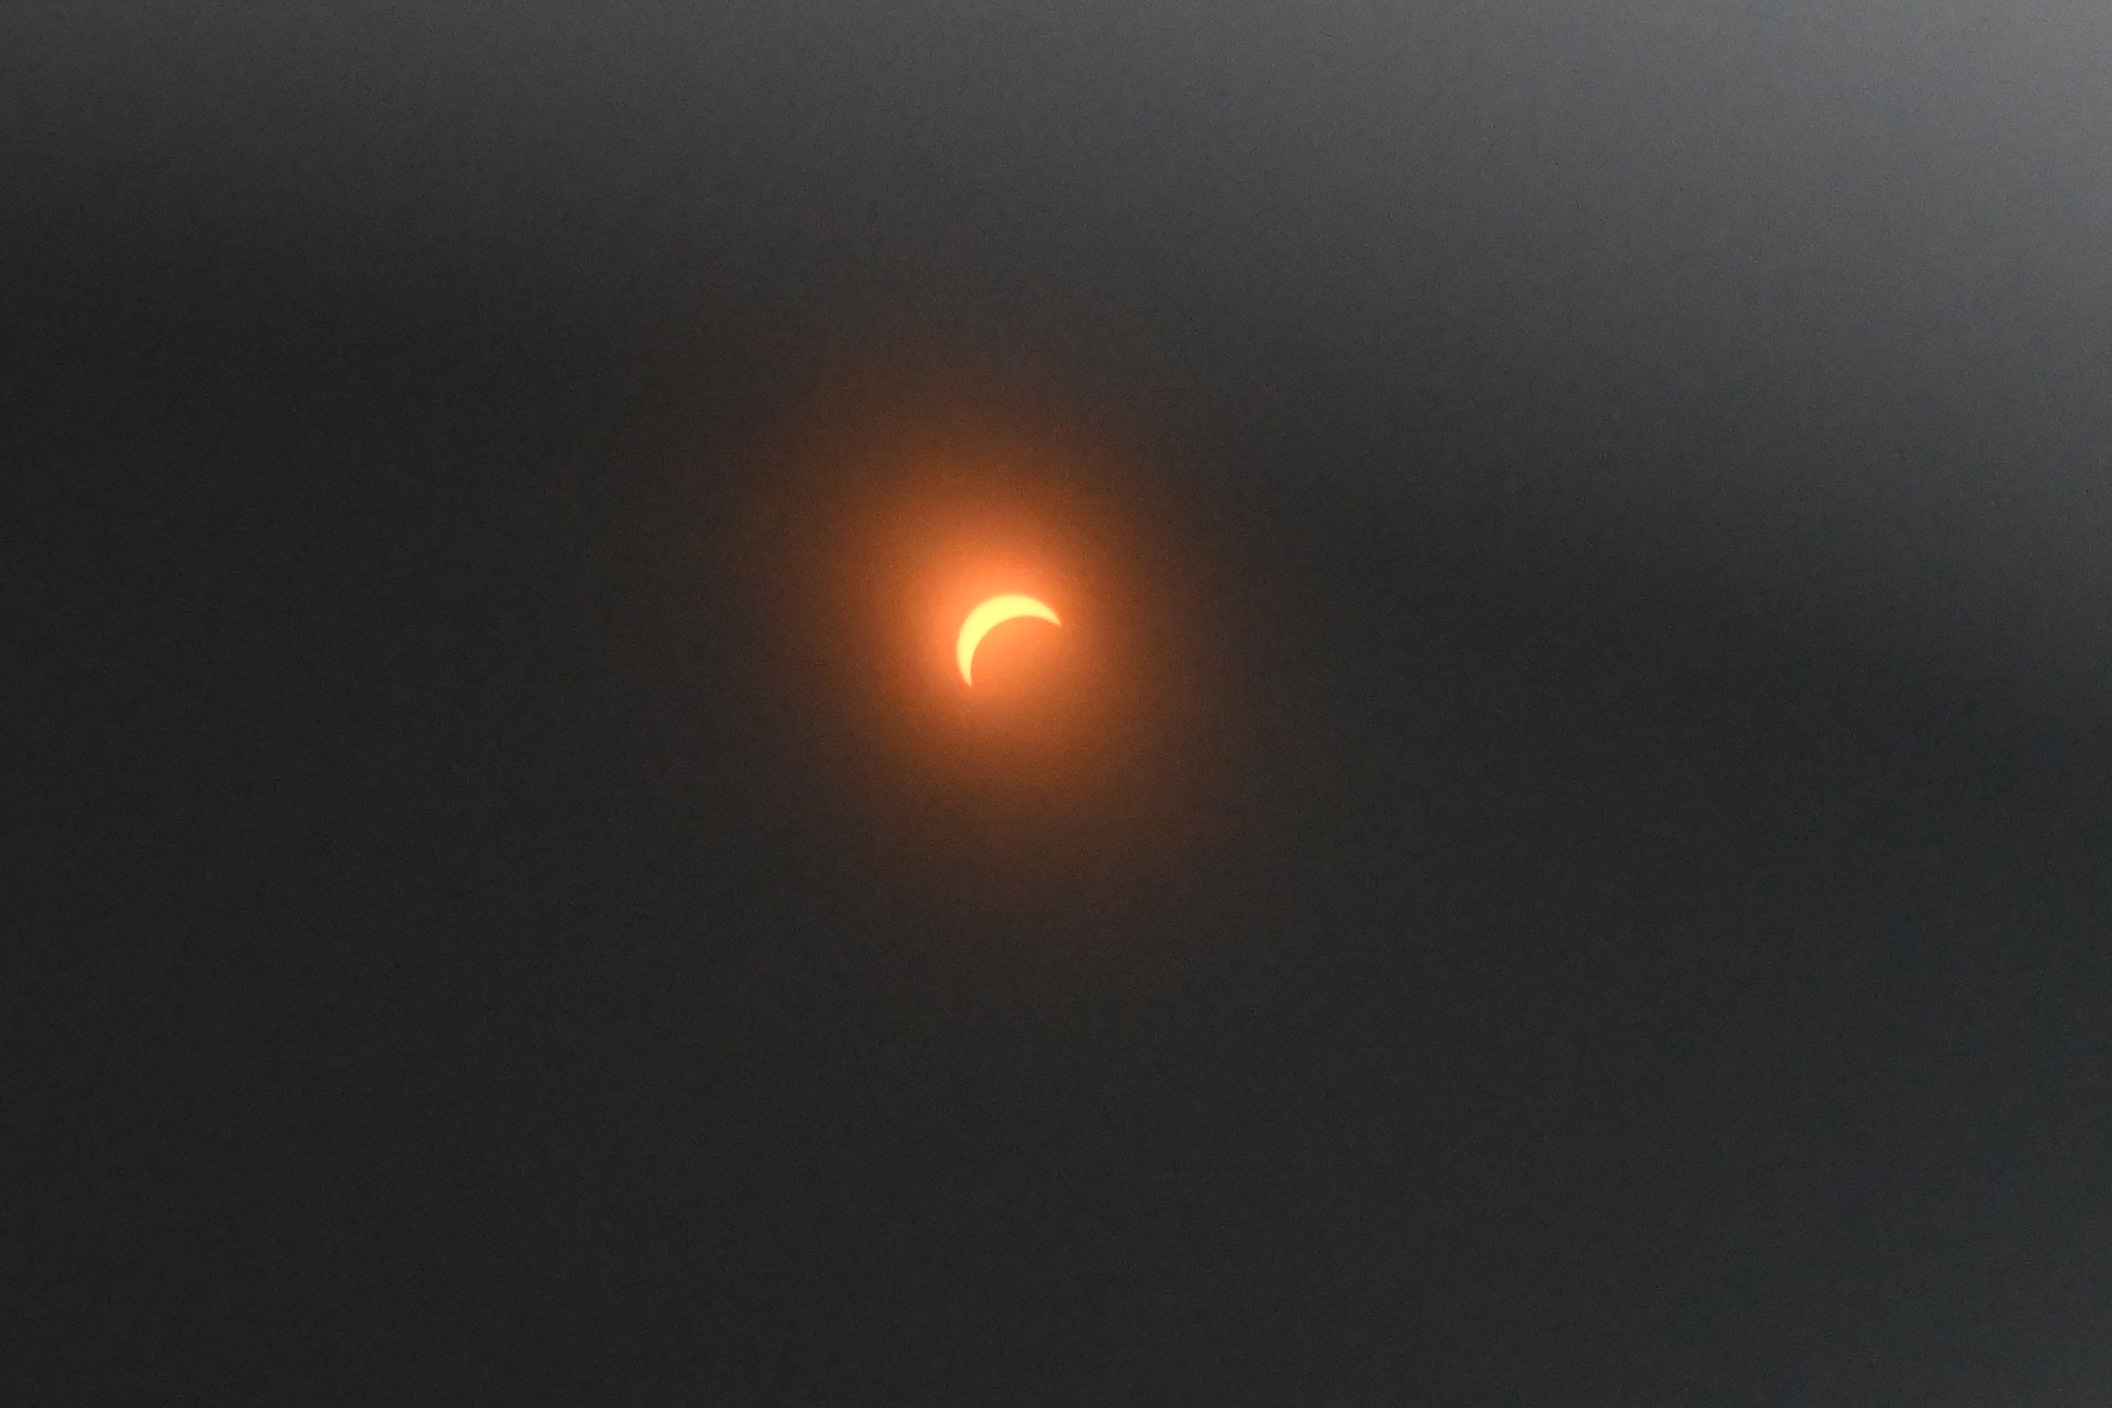 A view of the eclipse through eclipse glasses